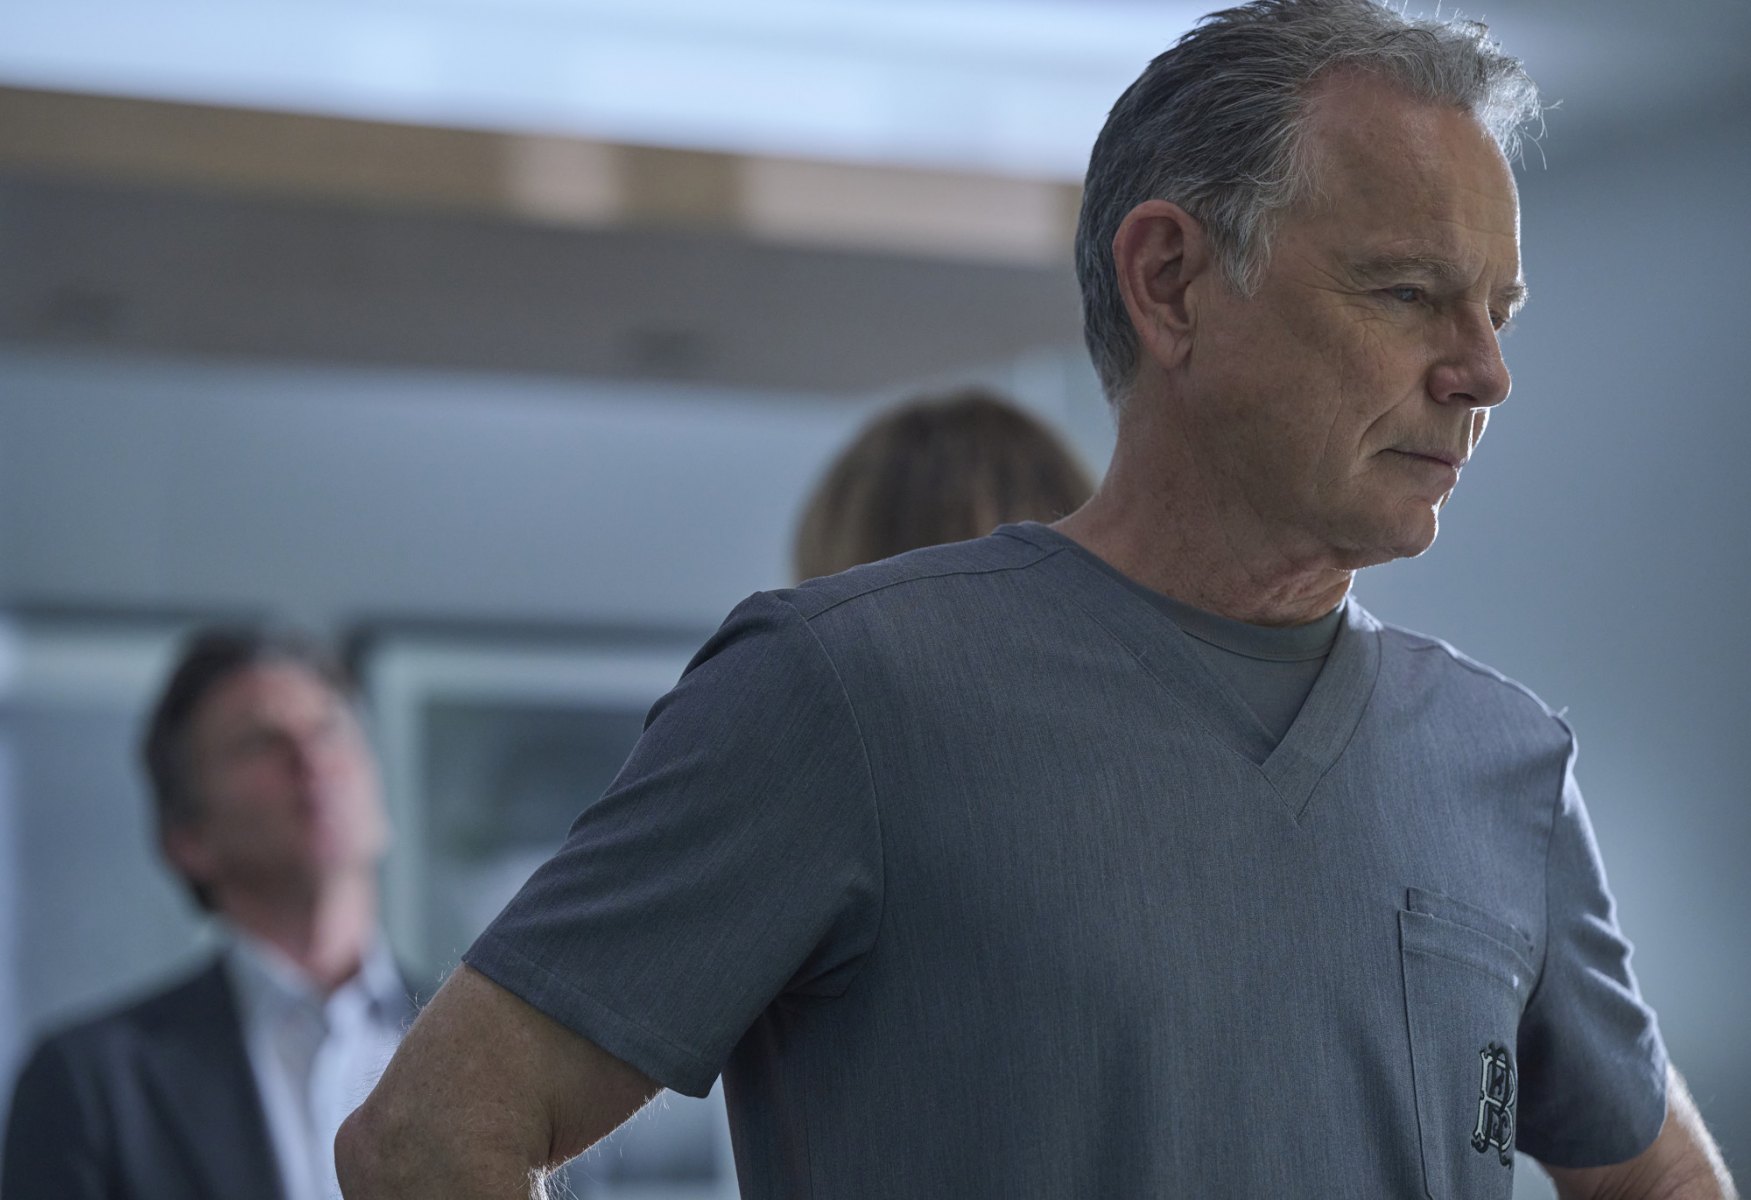 THE RESIDENT: Bruce Greenwood in the "All Hands on Deck" season finale episode of THE RESIDENT airing Tuesday, Jan. 17 (8:00-9:00 PM ET/PT) on FOX. ©2022 Fox Media LLC. CR: Tom Griscom/FOX